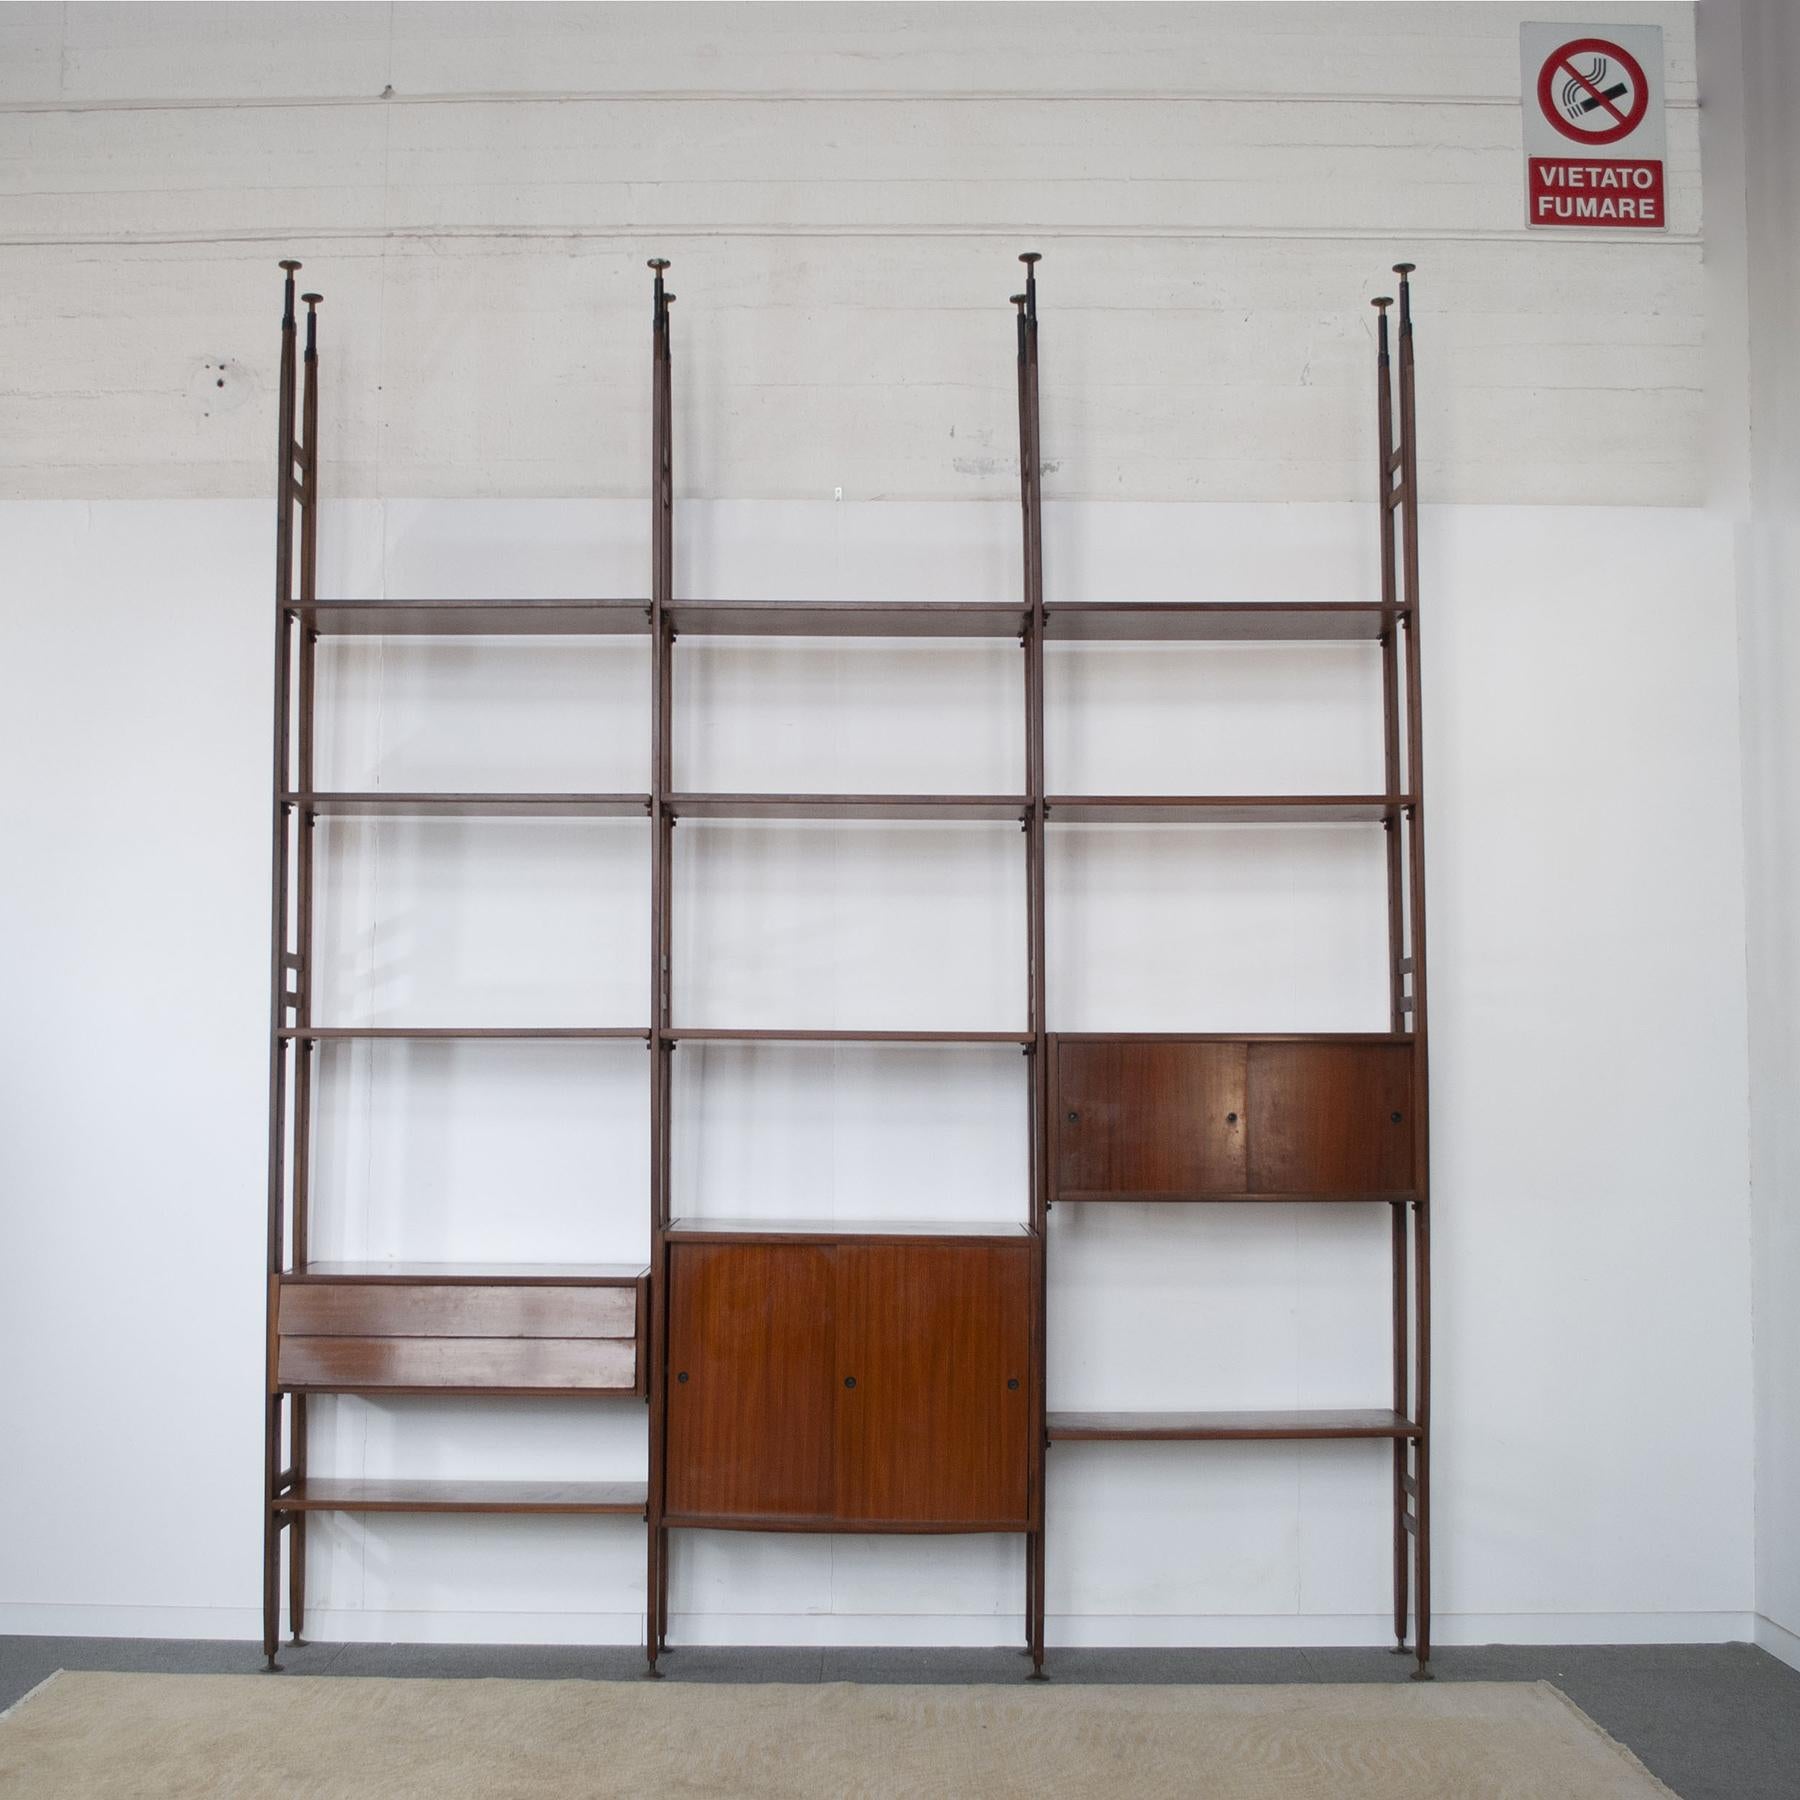 Mid-20th Century Italian Midcentury Bookcase in Wood from the Sixties